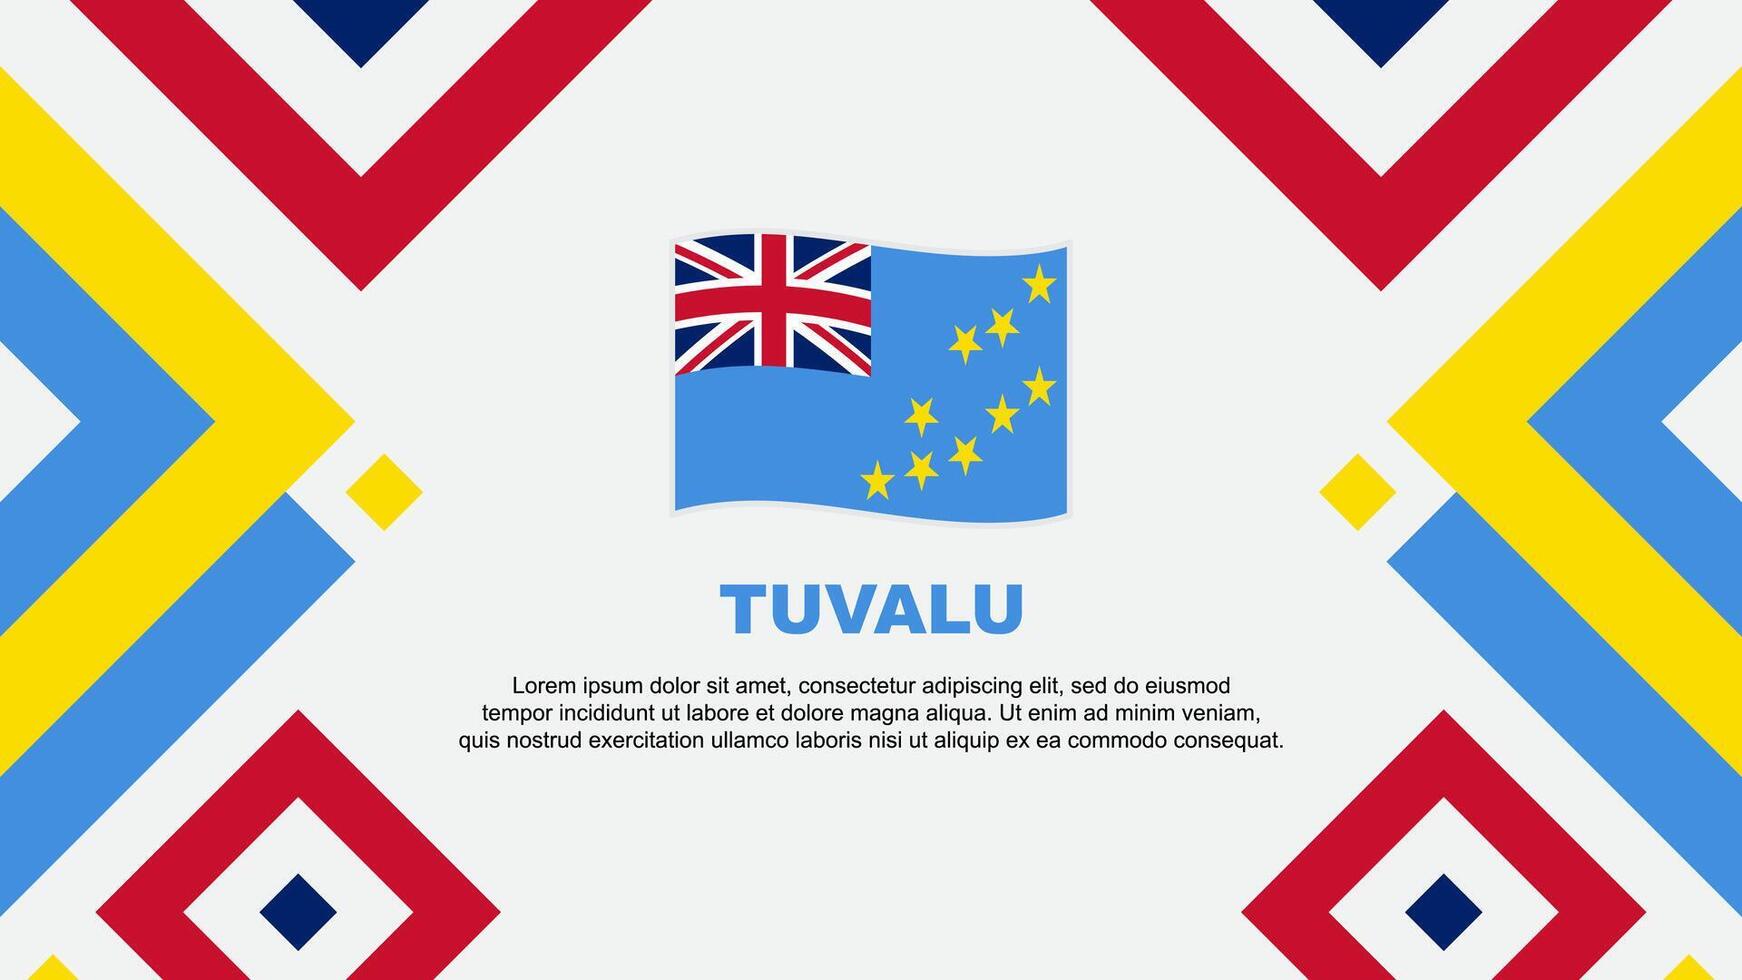 Tuvalu Flag Abstract Background Design Template. Tuvalu Independence Day Banner Wallpaper Vector Illustration. Tuvalu Template